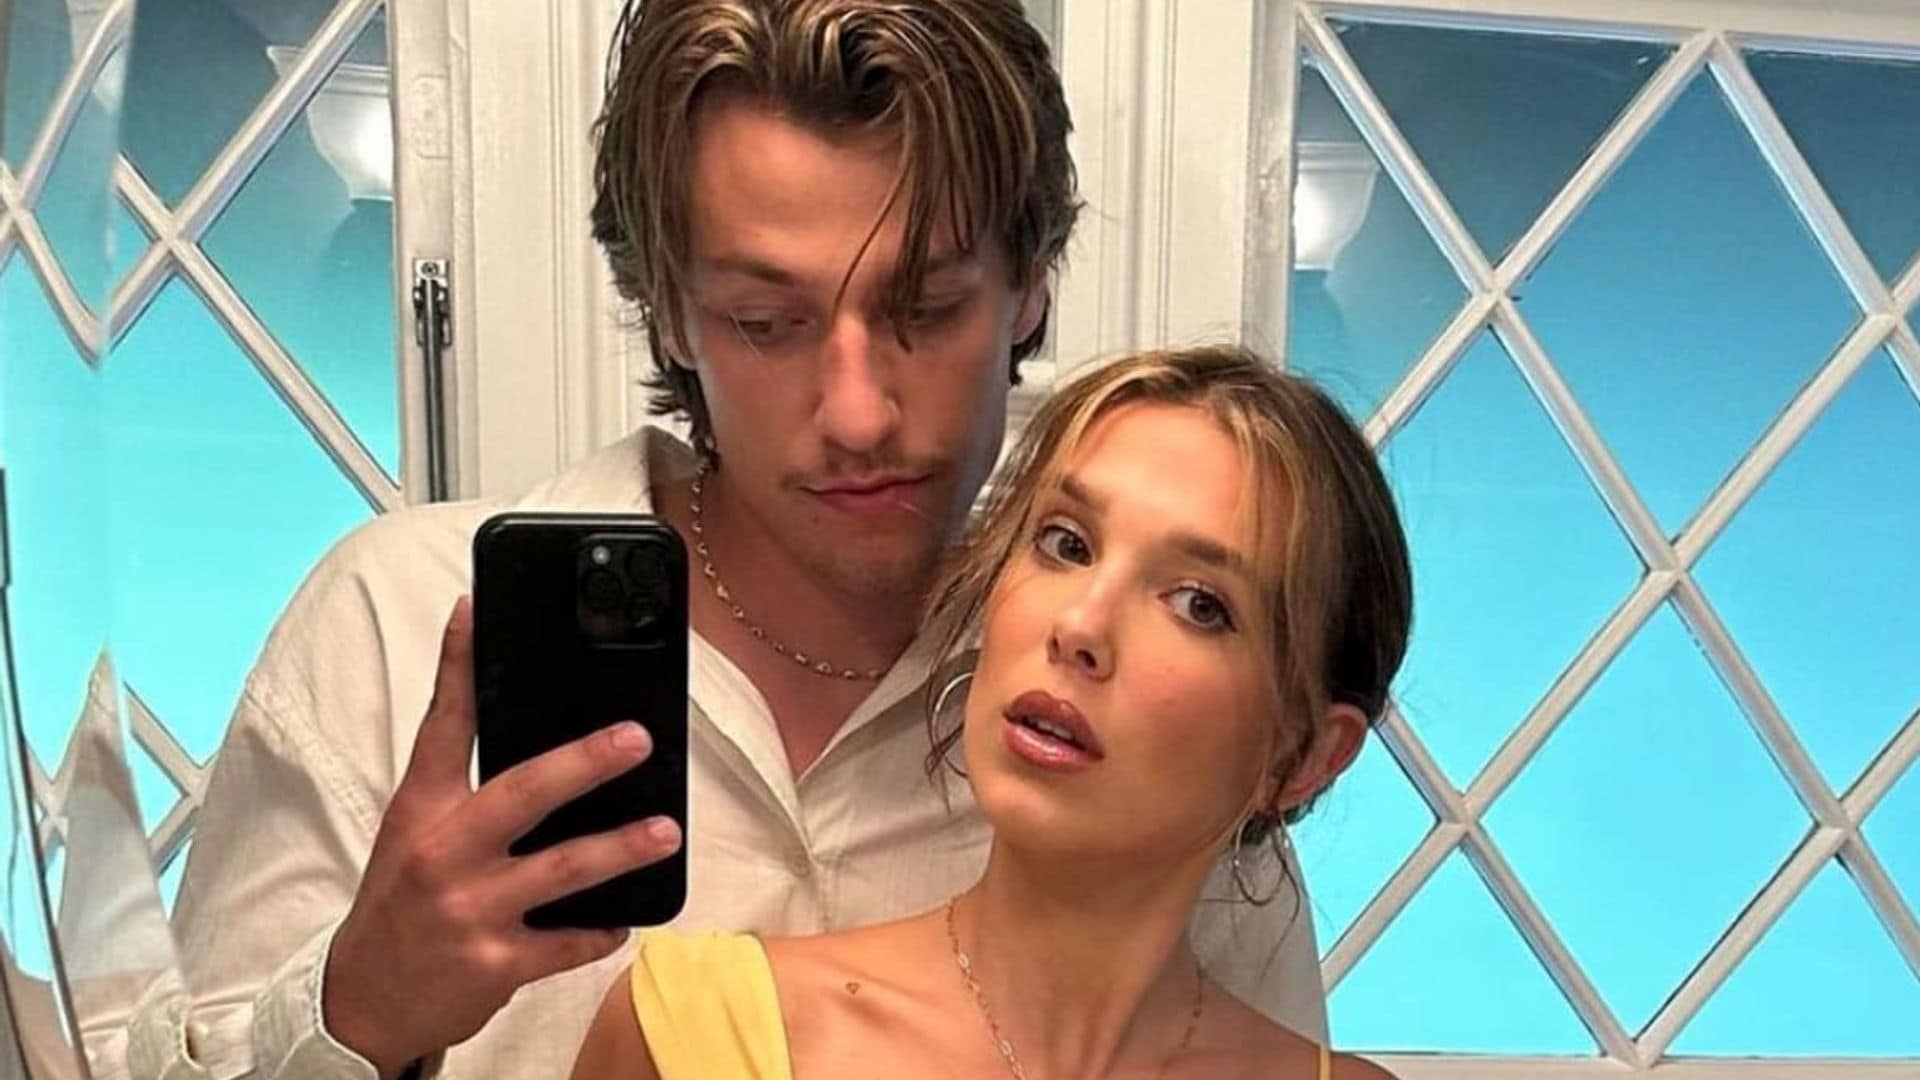 Millie Bobby Brown proves she is ready to be a ‘married woman’ amid Jake Bongiovi engagement